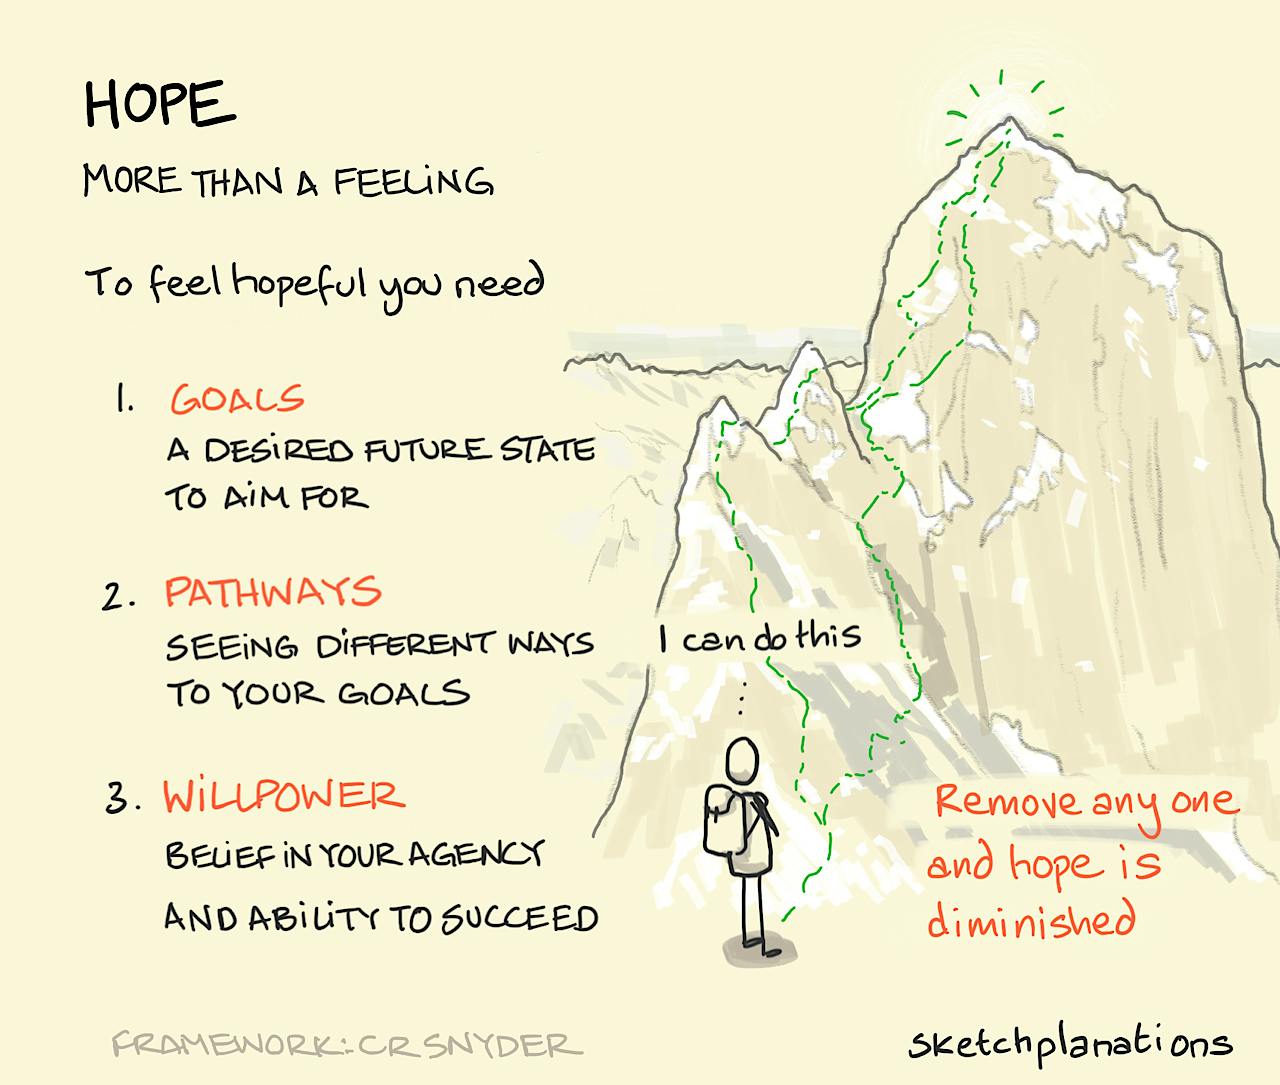 Hope: CR Synder's model for hope illustrated by a climber looking at The Ogre mountain considering the goals, pathways, and willpower that gives them hope they can climb it